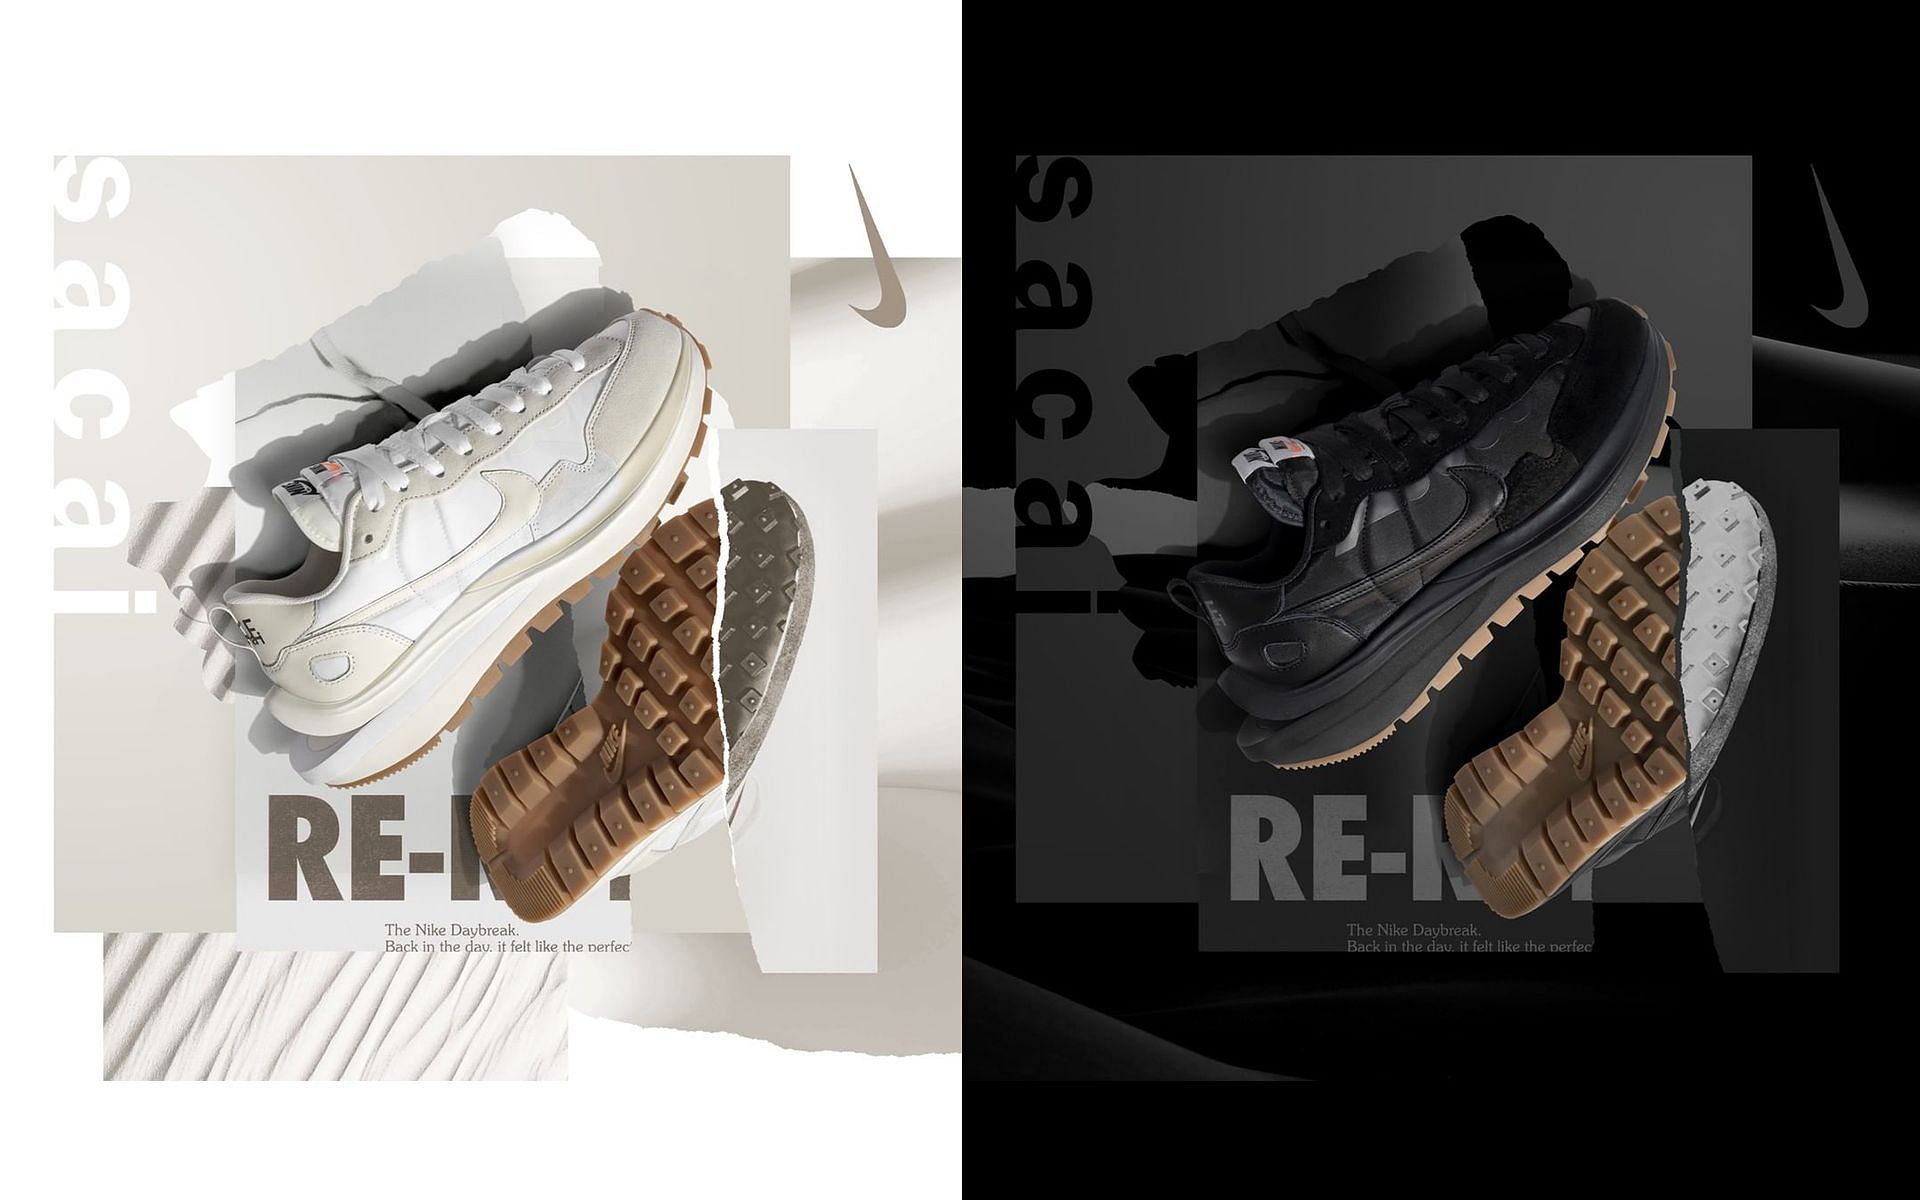 Nike collaborated with Chitose Abe to release their Vaporwaffle sneakers (Image via Sacai)